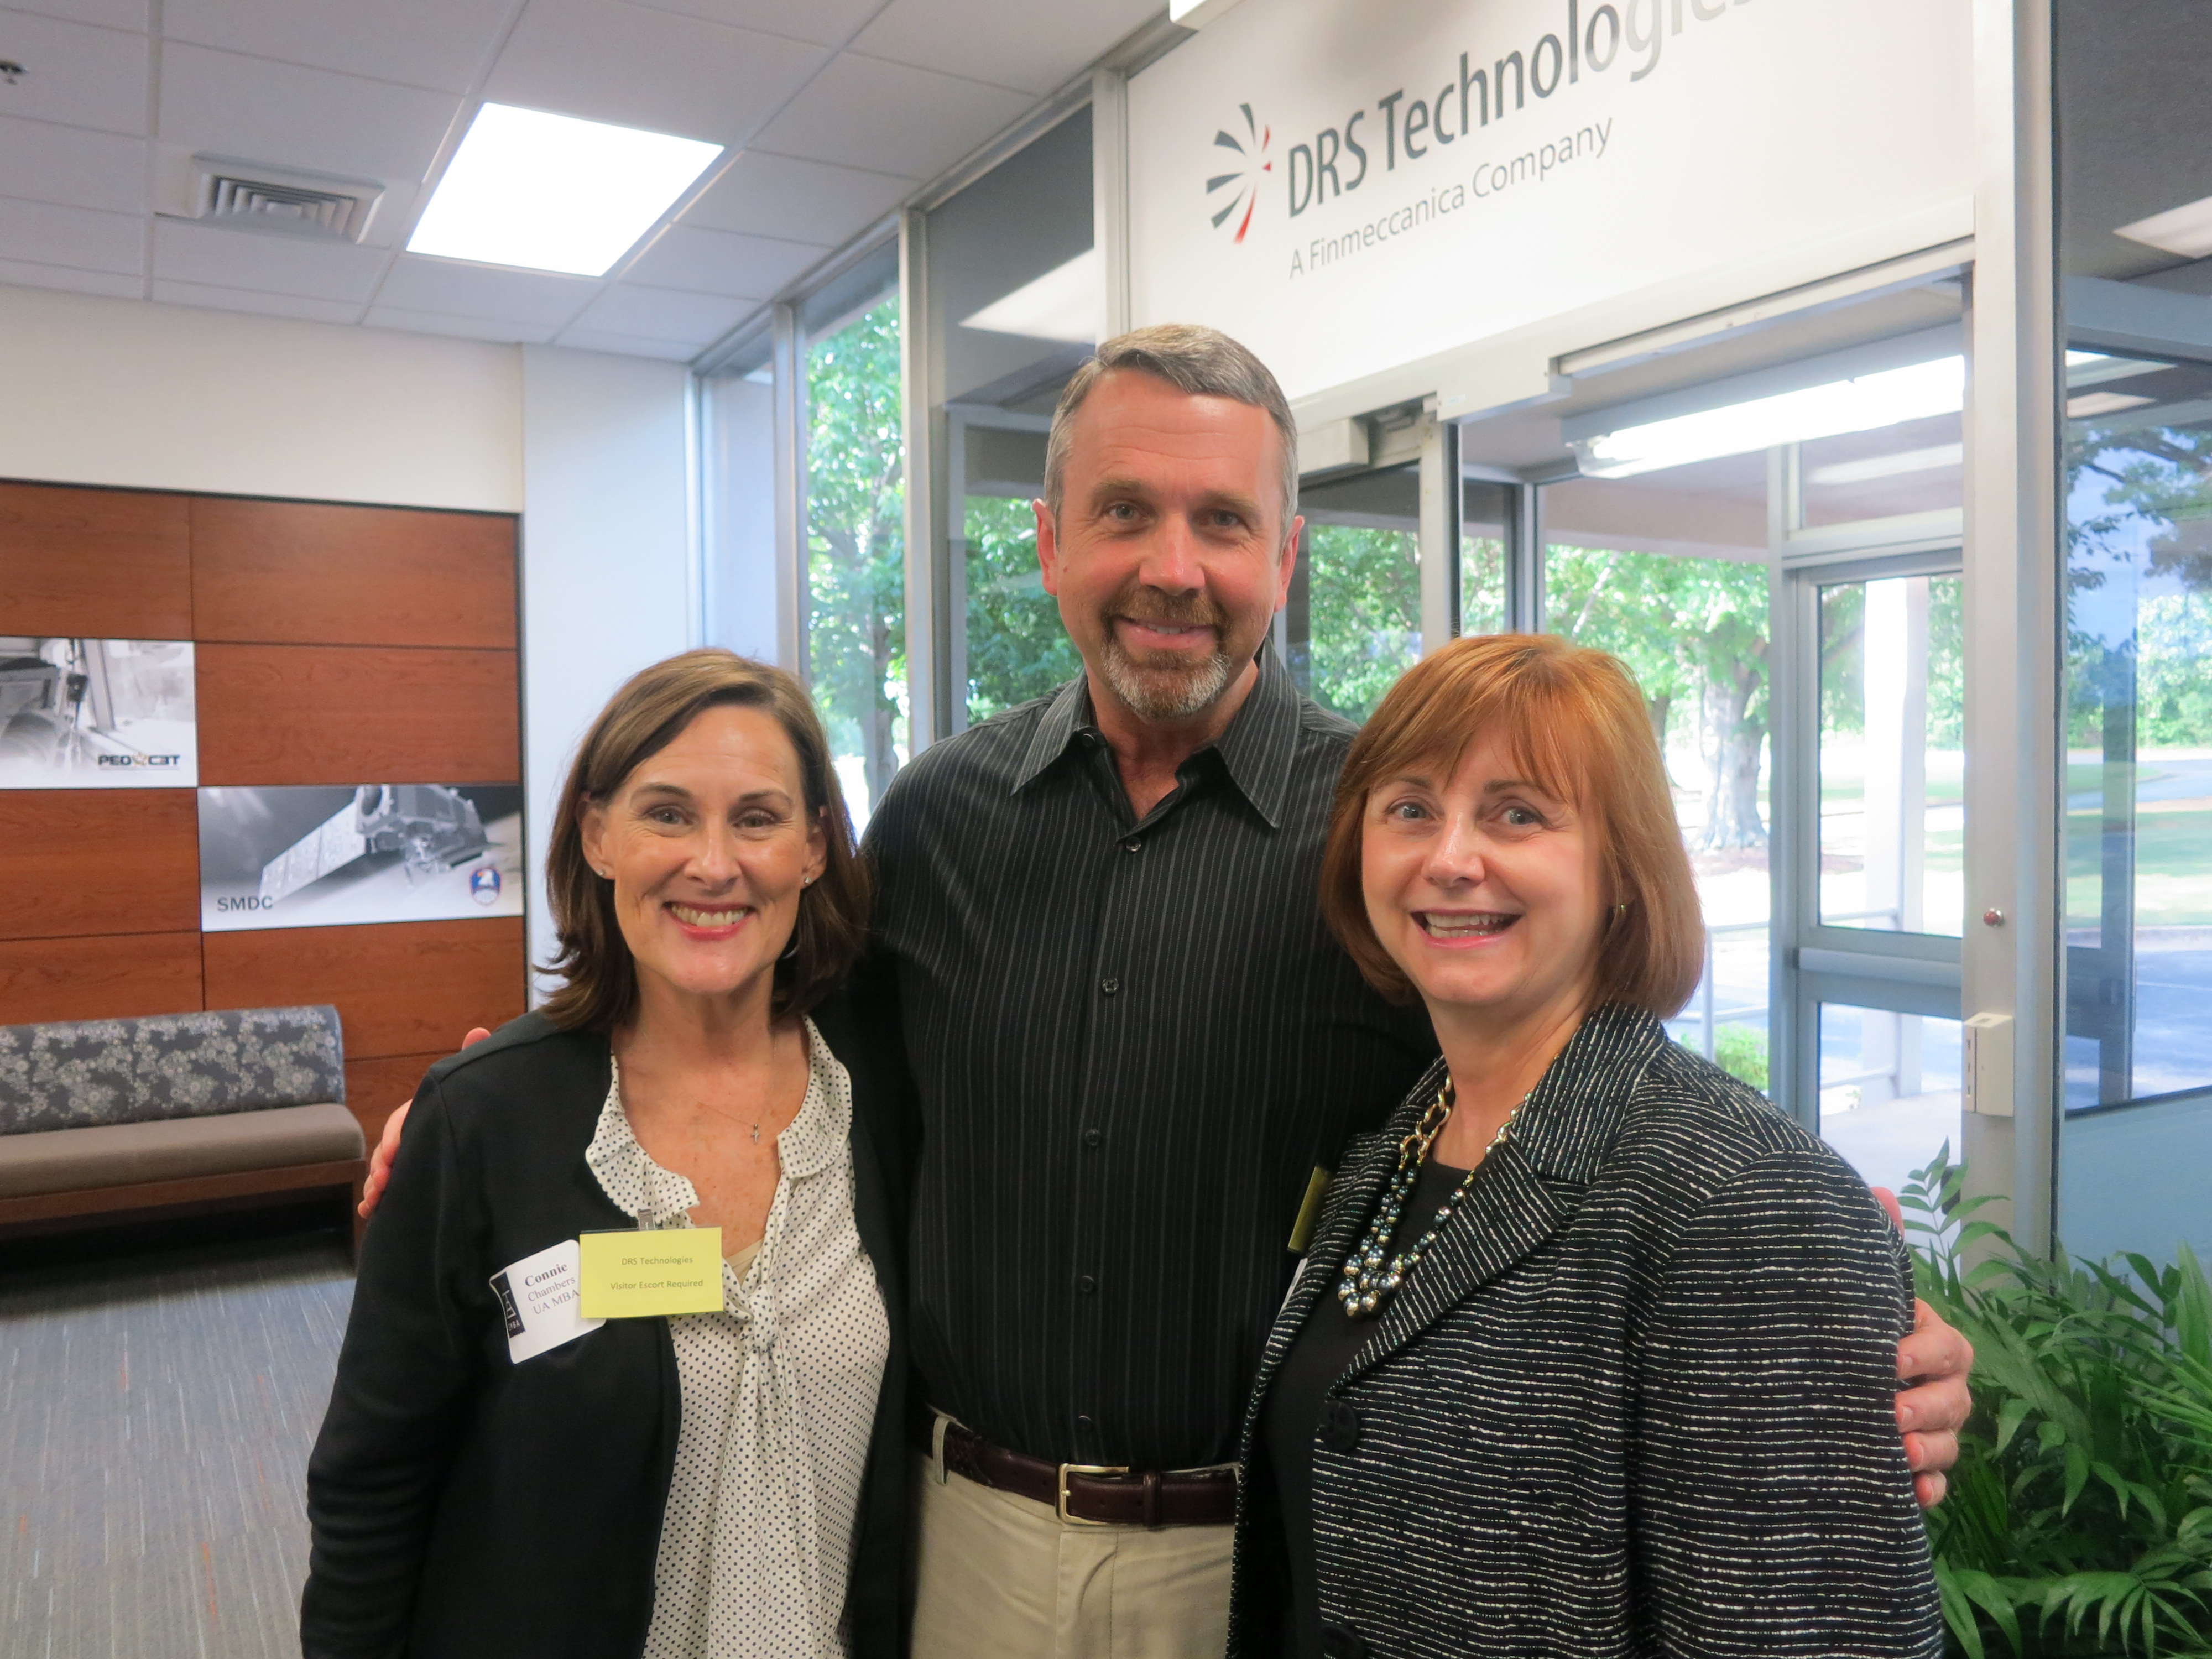 Connie Chambers, Director of Corporate Partnerships for Manderson Graduate School of Business, with Jon Guertin (HEMBA 2013), Director of Engineering Services for 5 Stones Research Corp., and Donna Blackburn, Director of the Manderson Executive MBA Program 